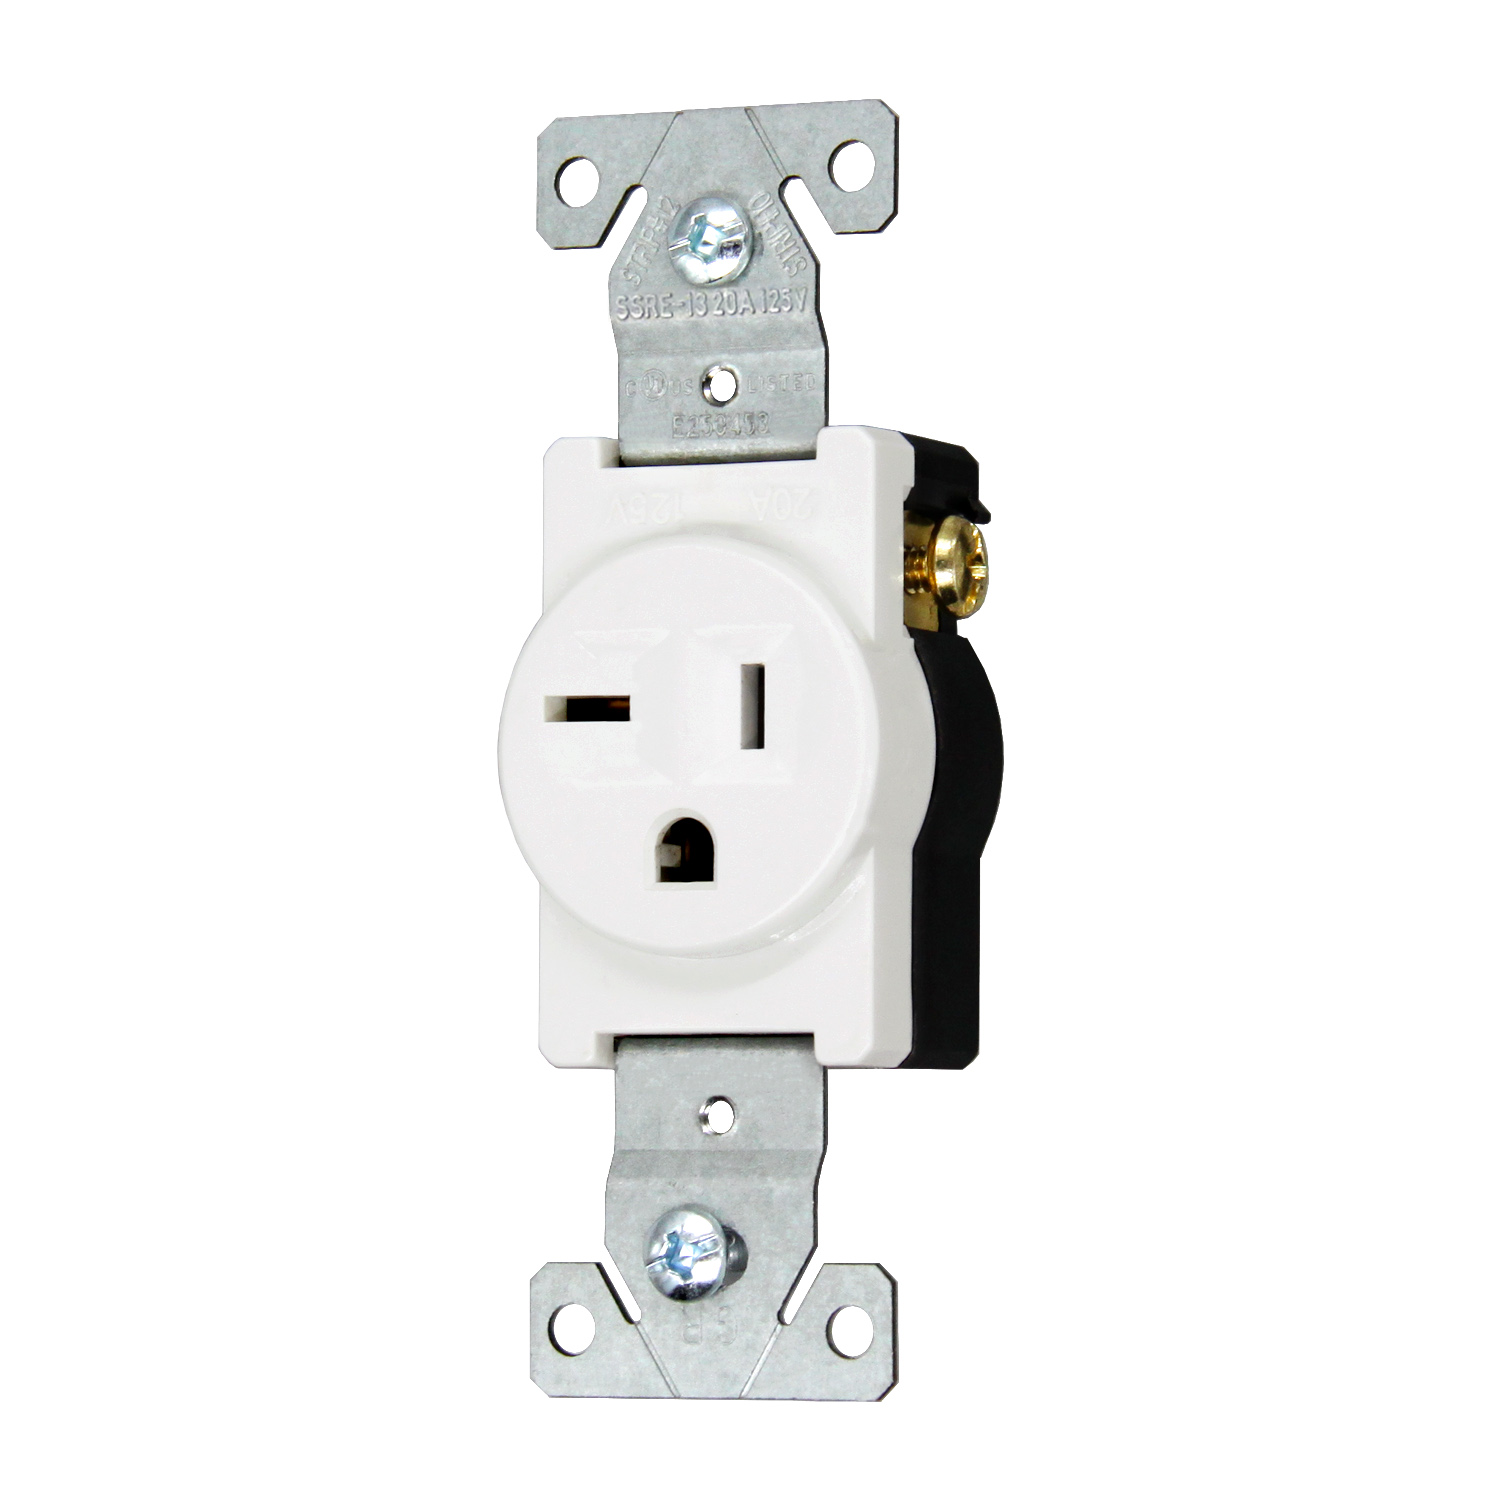 UL Listed Grounding Screw 20 Amp single Receptacle, 3-Wire, 2-Pole, 5-20R, SSRE-13